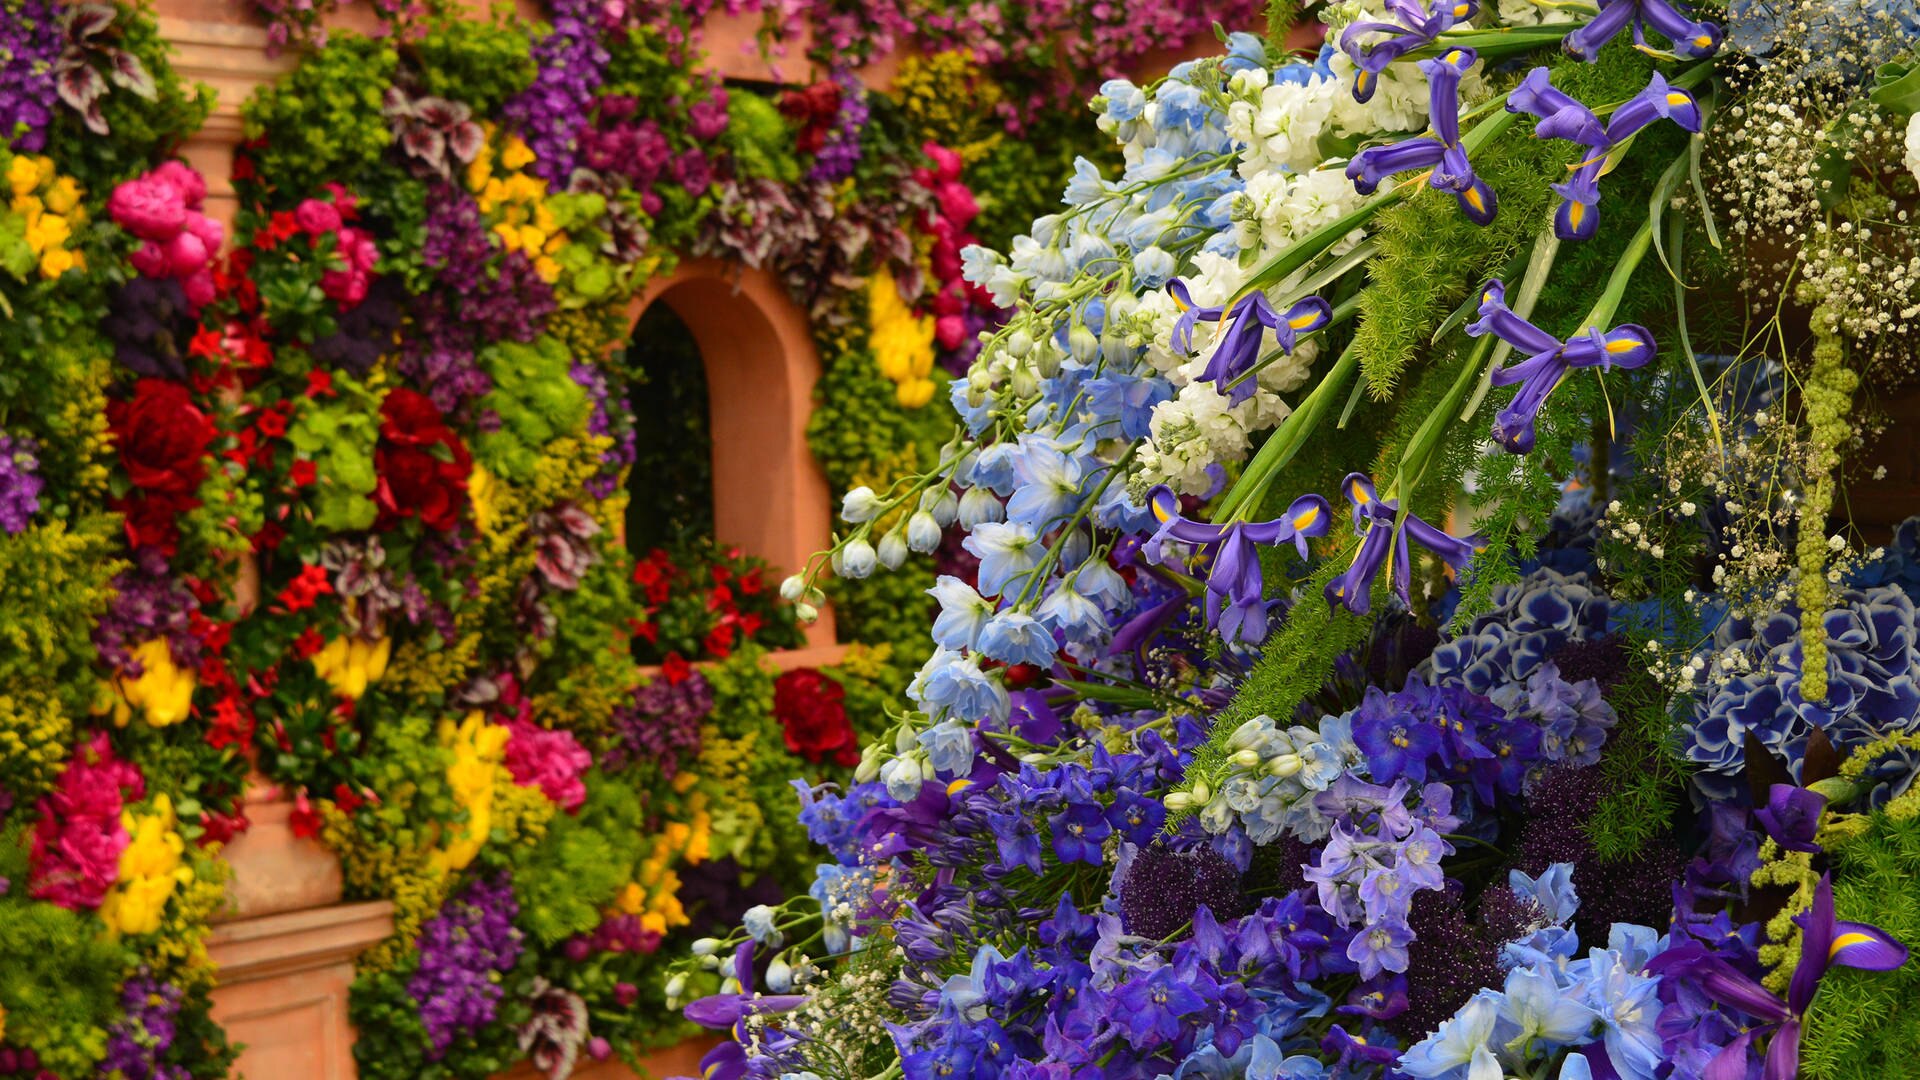 Flowers at the Chelsea Flower Show in London